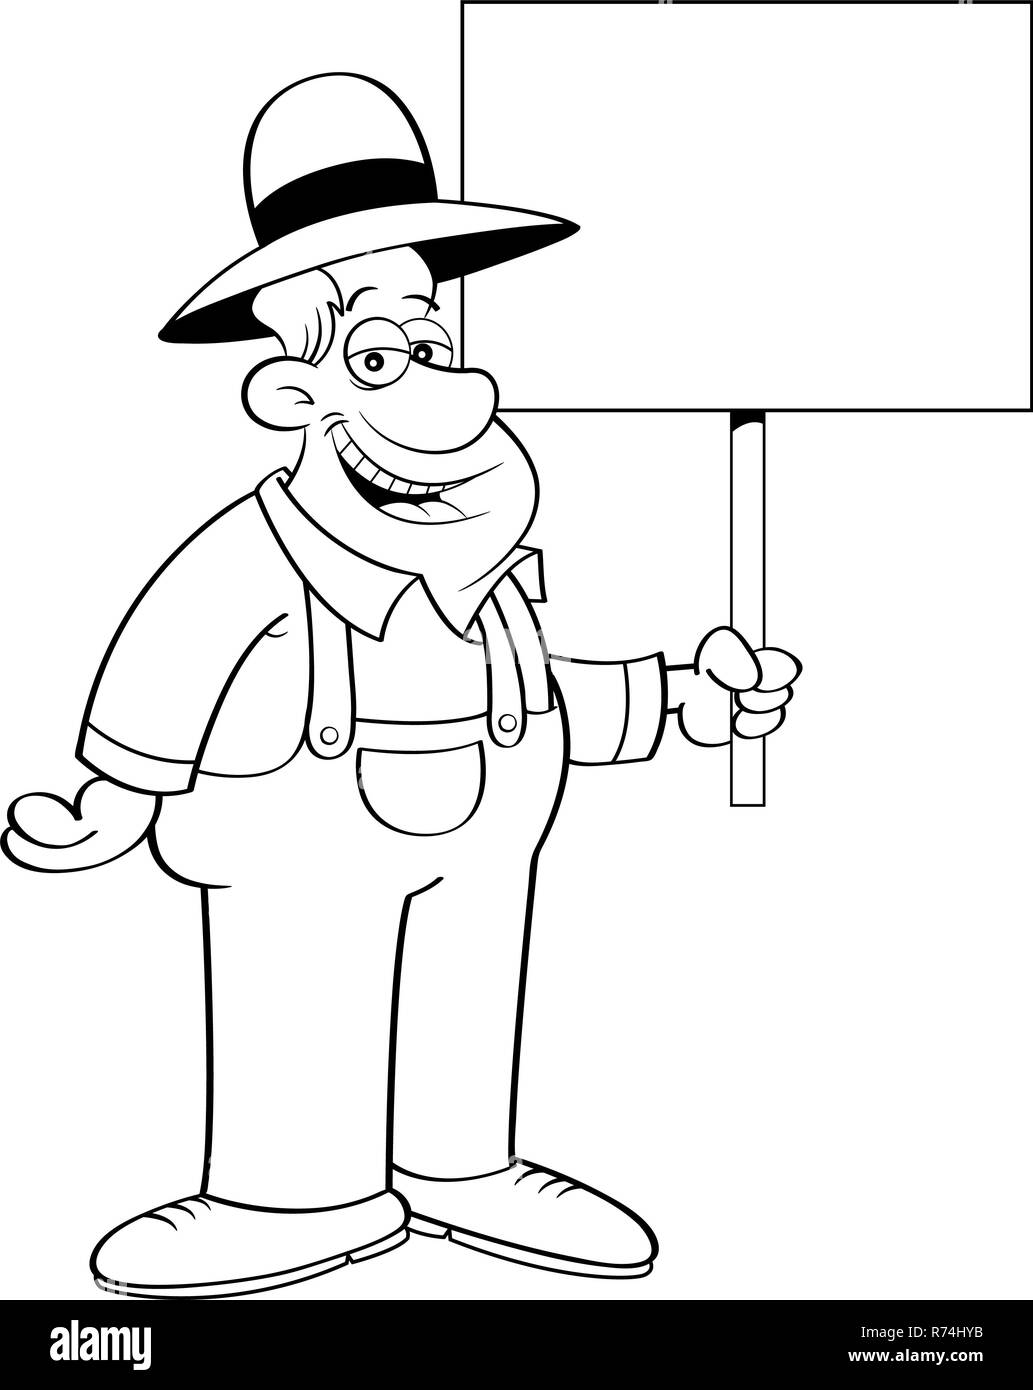 Black and white illustration of a farmer holding a sign. Stock Photo